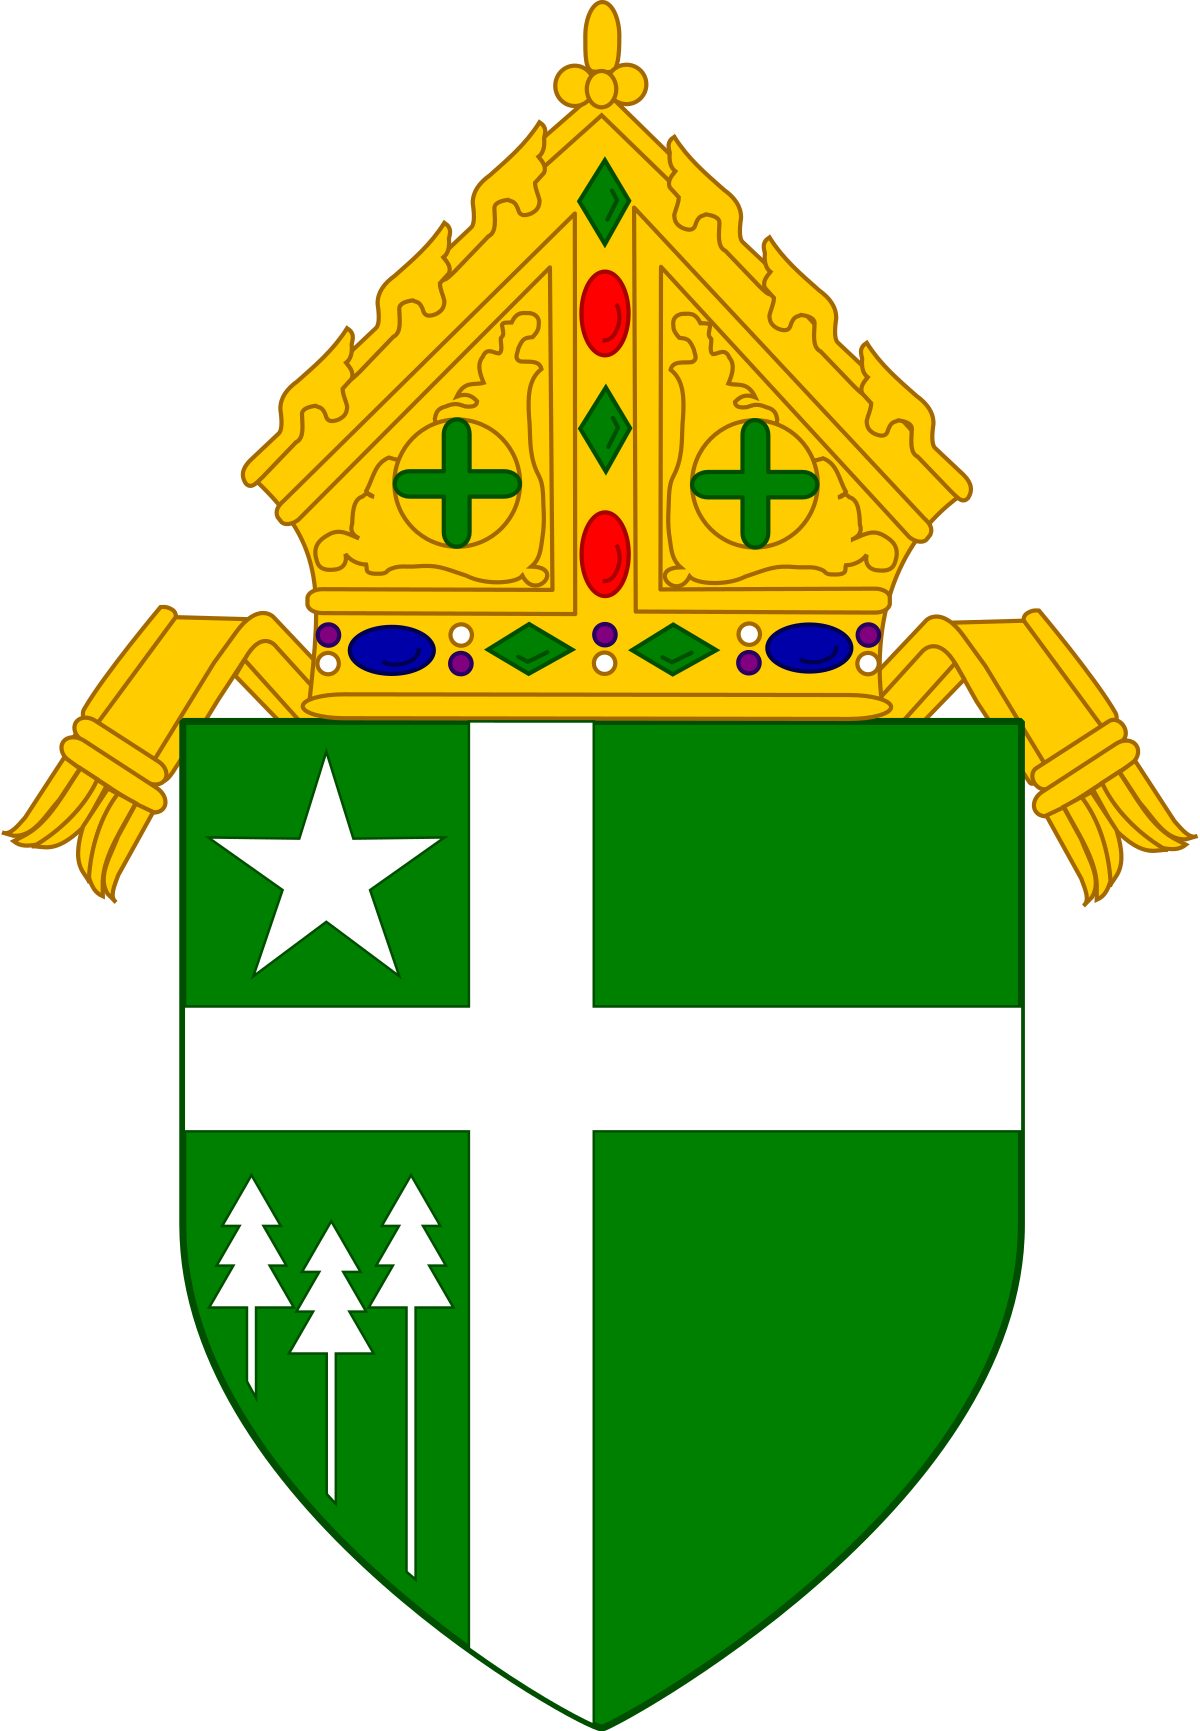 Coat Of Arms Of The Roman Catholic Diocese Of Tyler - Catholic Diocese Coat Of Arms (1200x1731)